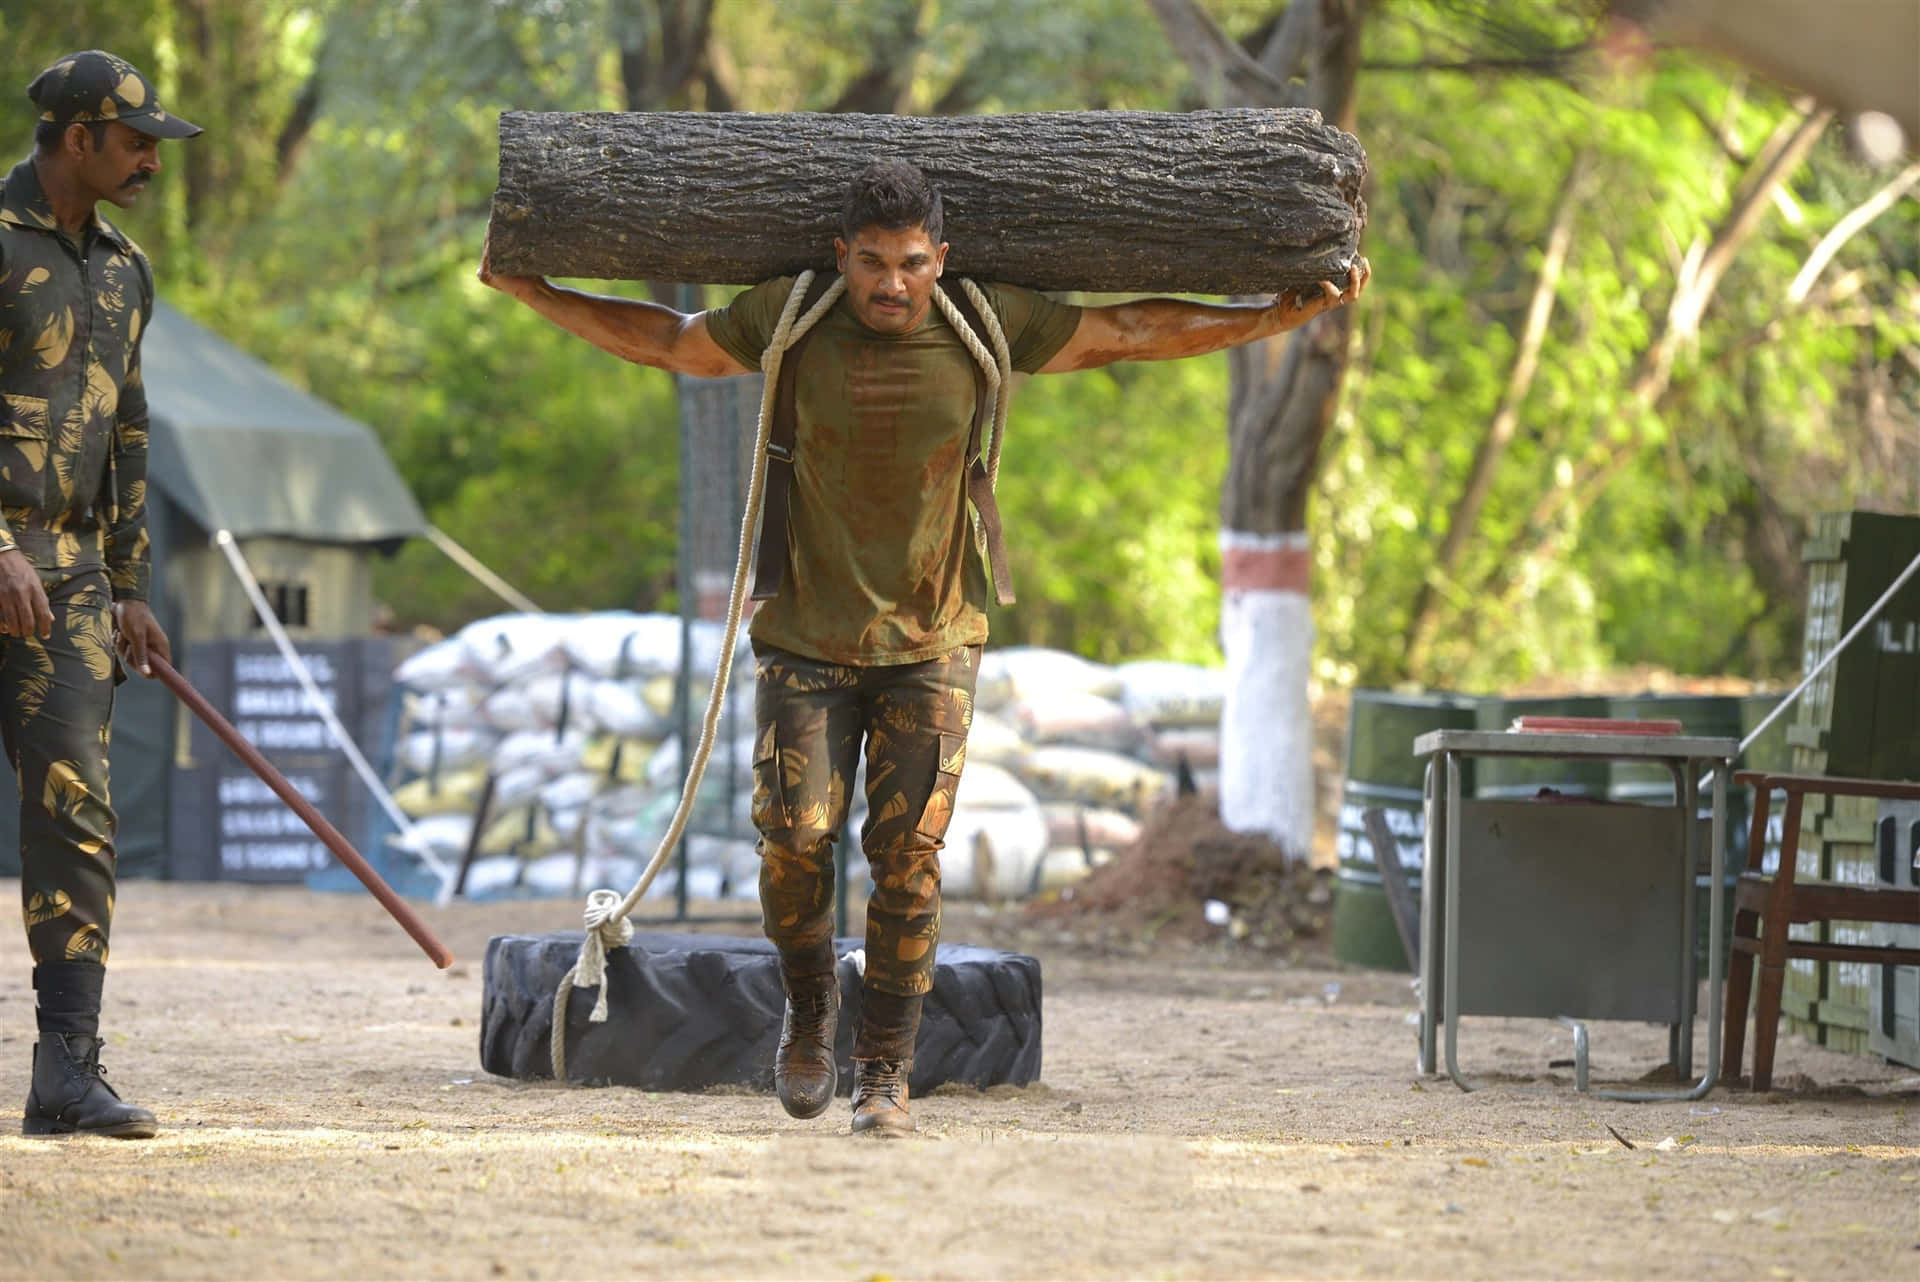 Surya, The Determined Soldier - A Still From The Movie 'surya The Soldier' Featuring Allu Arjun Background